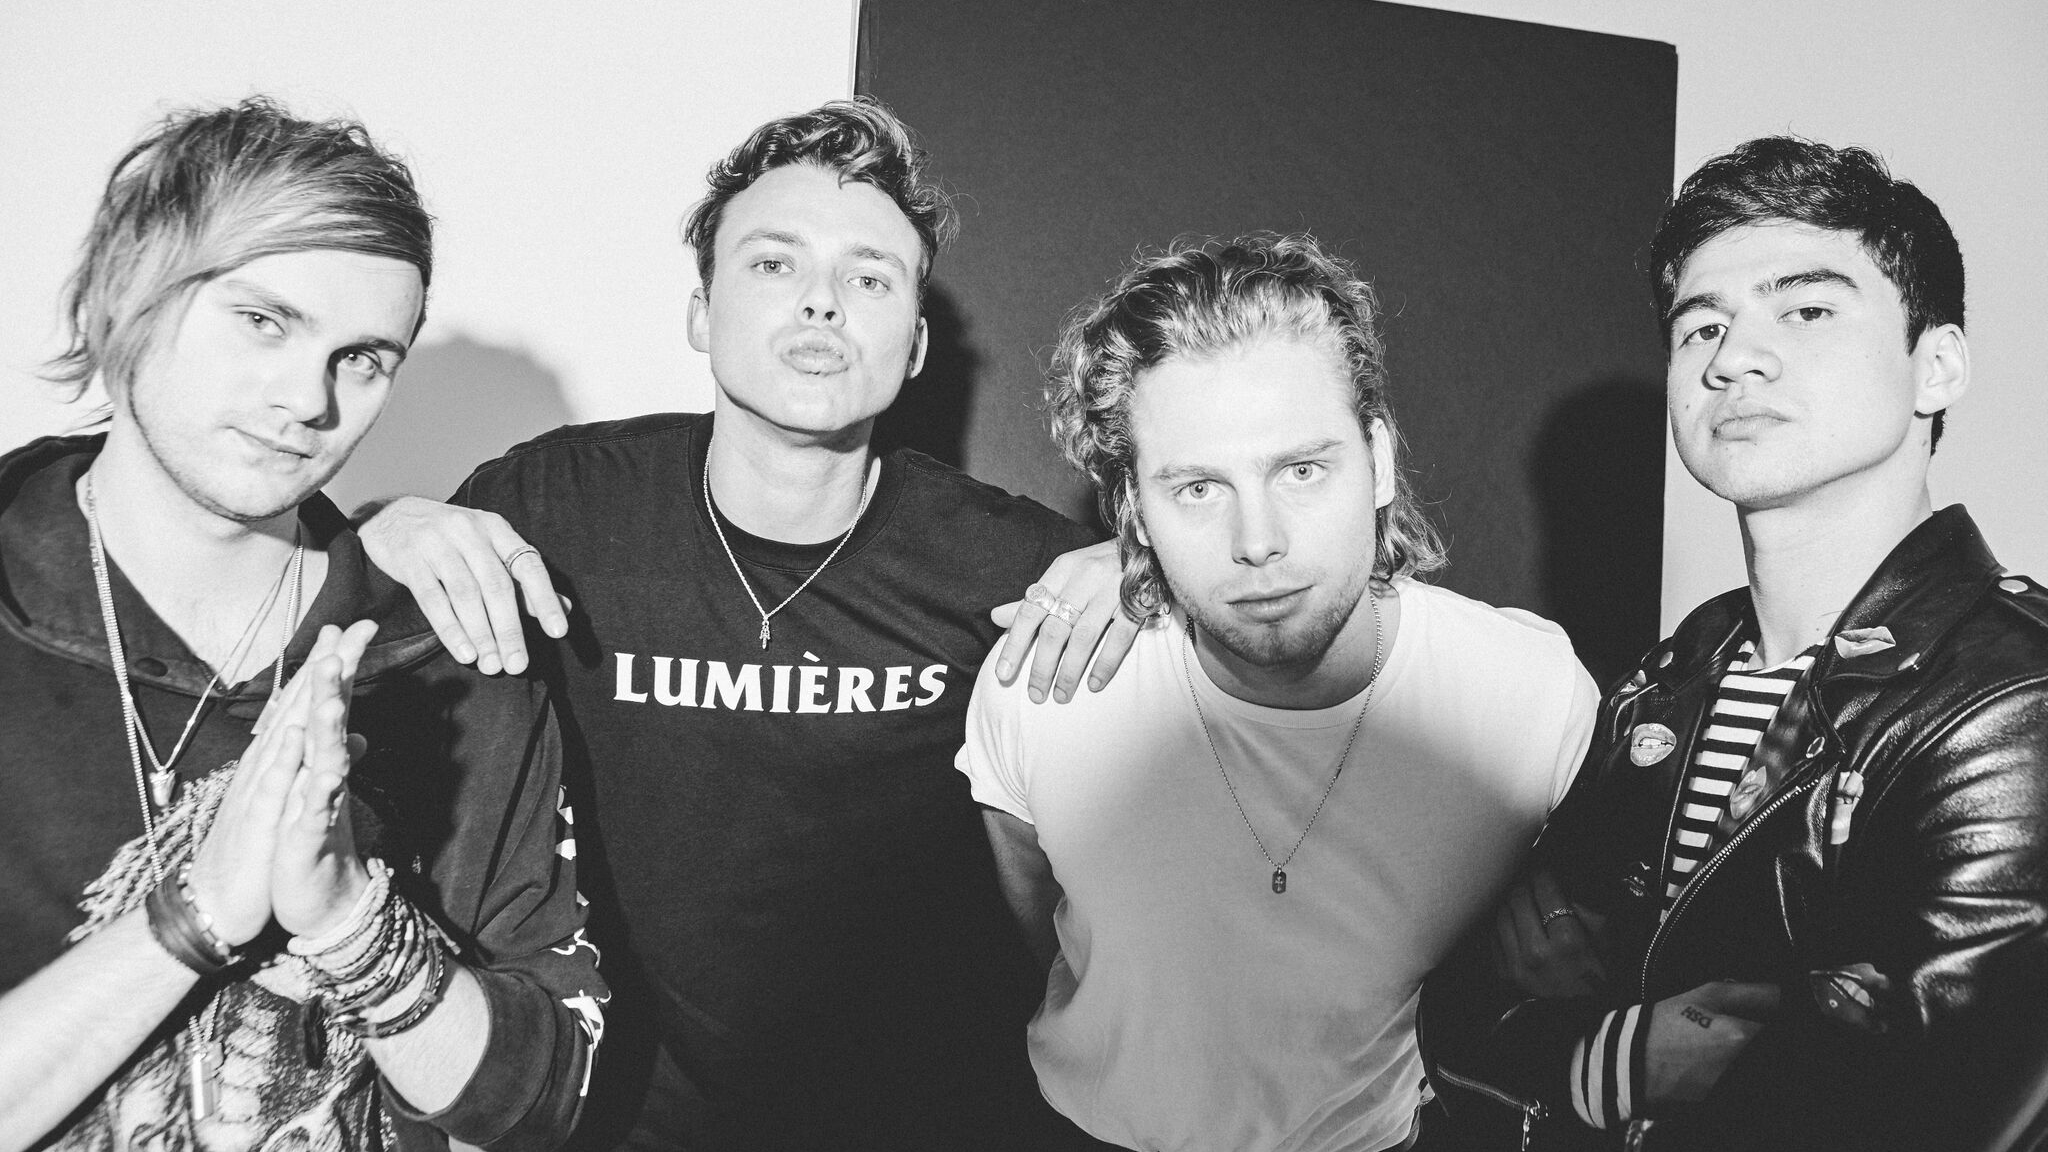 5 seconds of summer lead photo